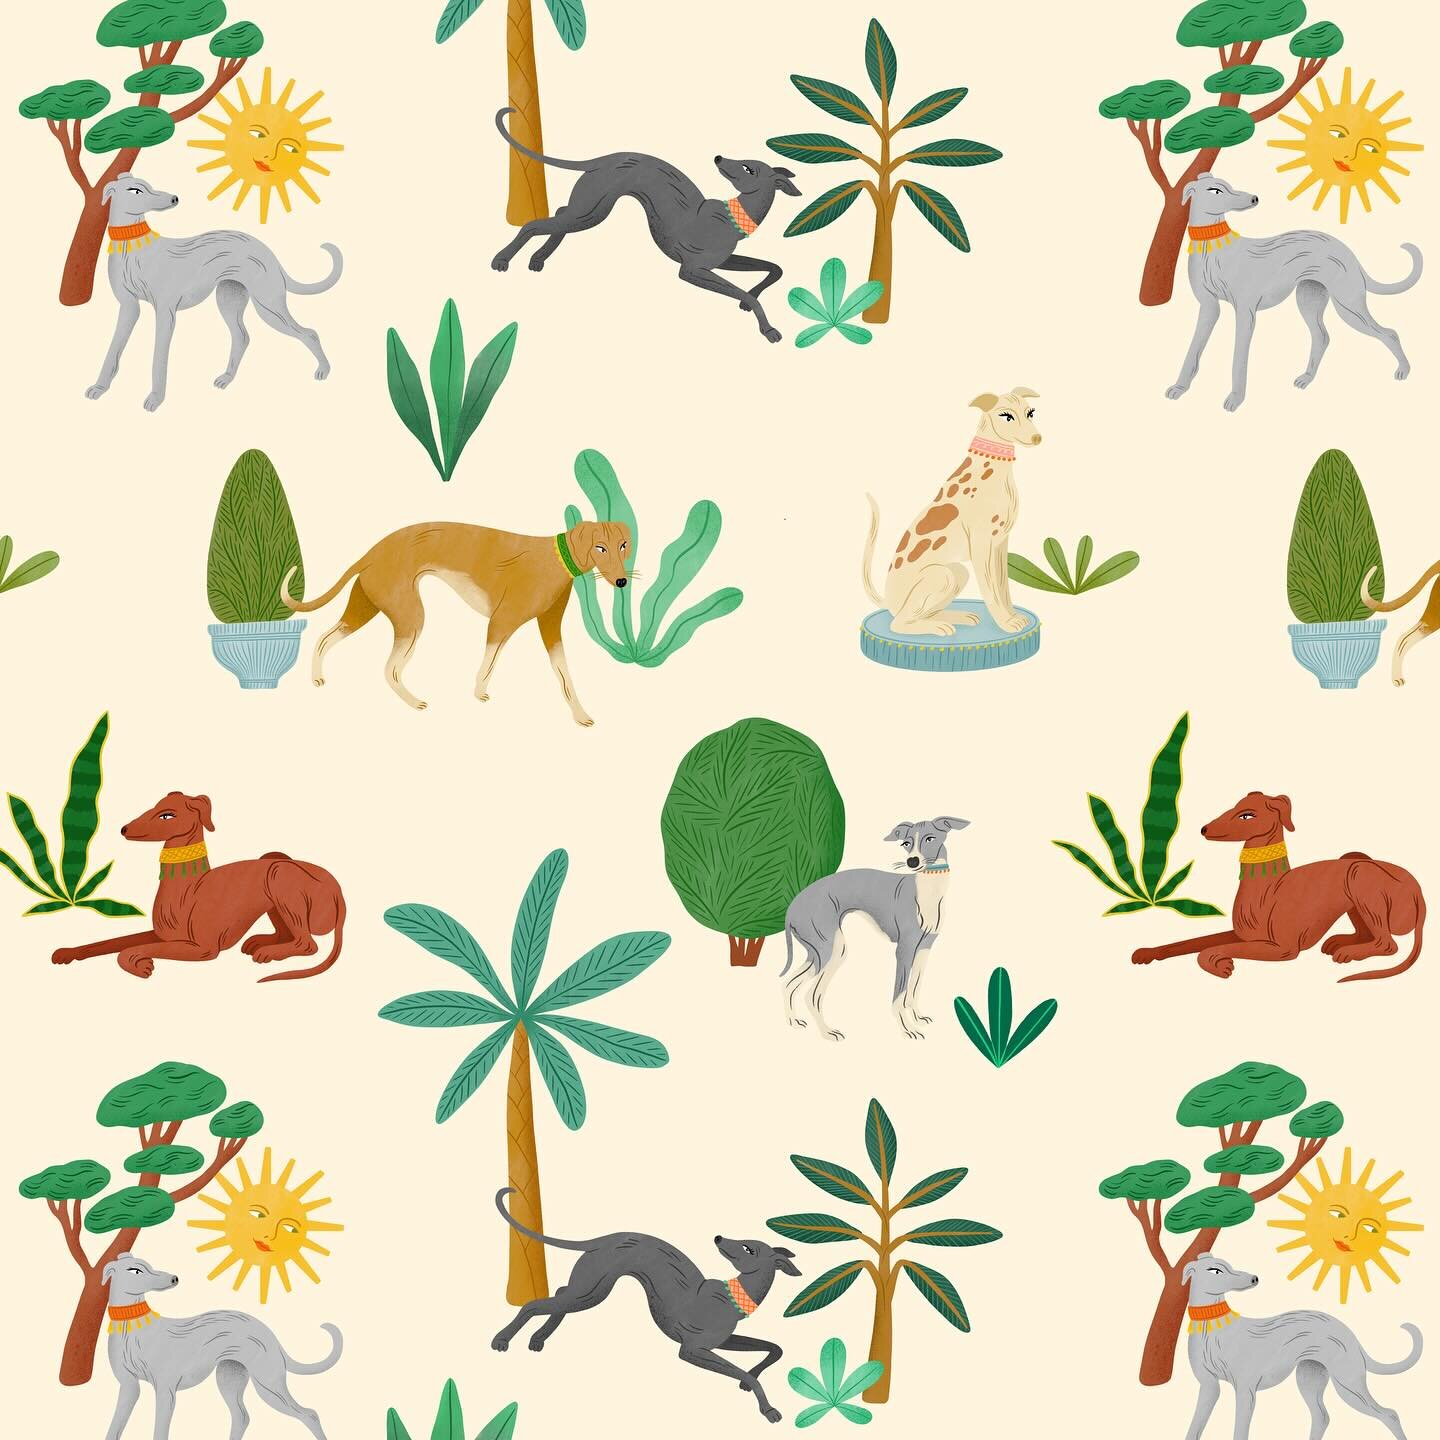 Whippet pattern from a while back 🌳 Creating new patterns for a new collab today 🐕